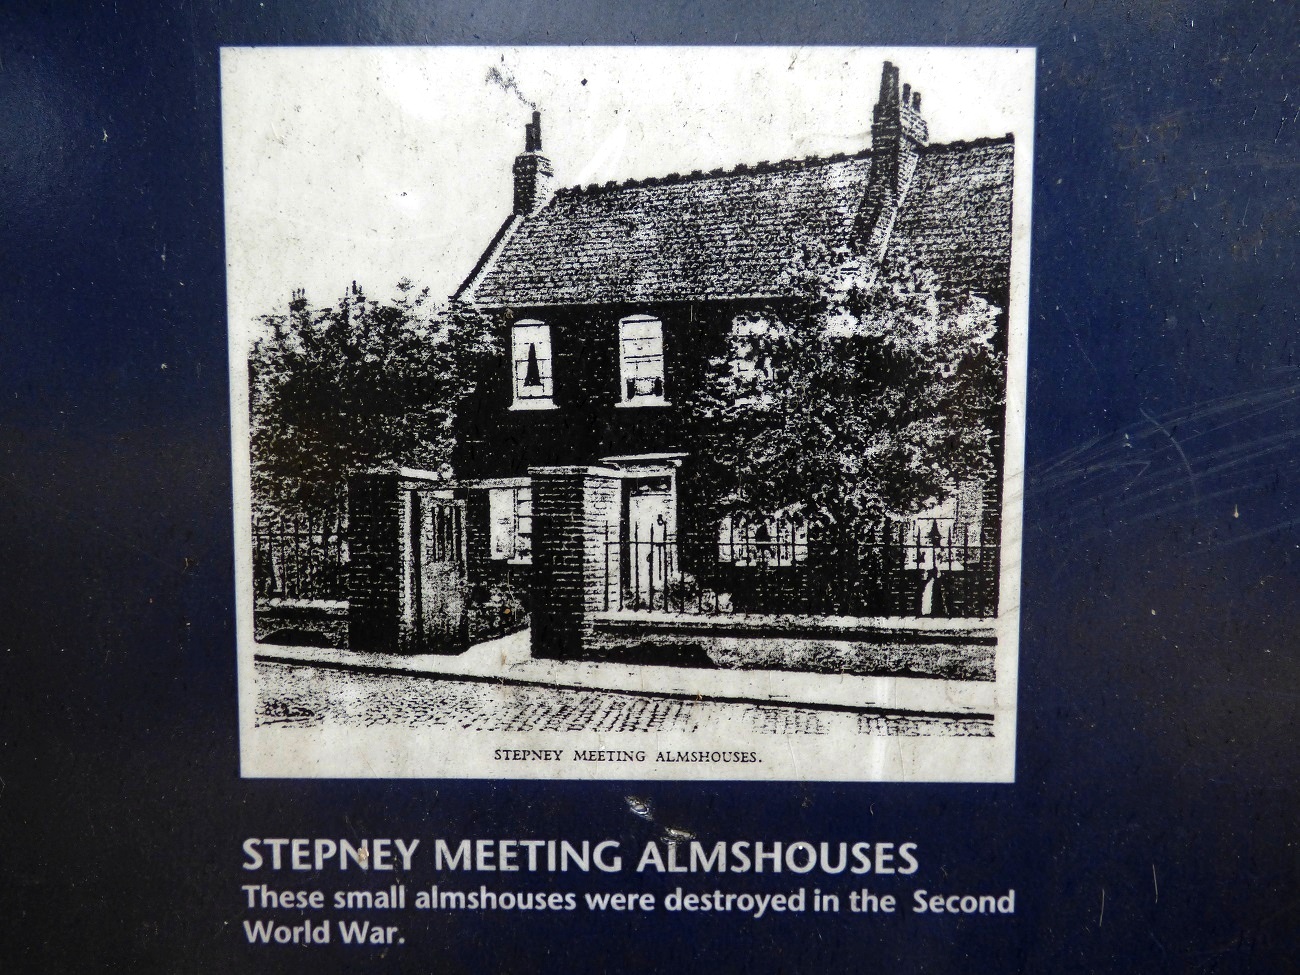 20160817_Tower-Hamlets_Stepney-Meeting-Burial-Ground_The-Old-Almshouses